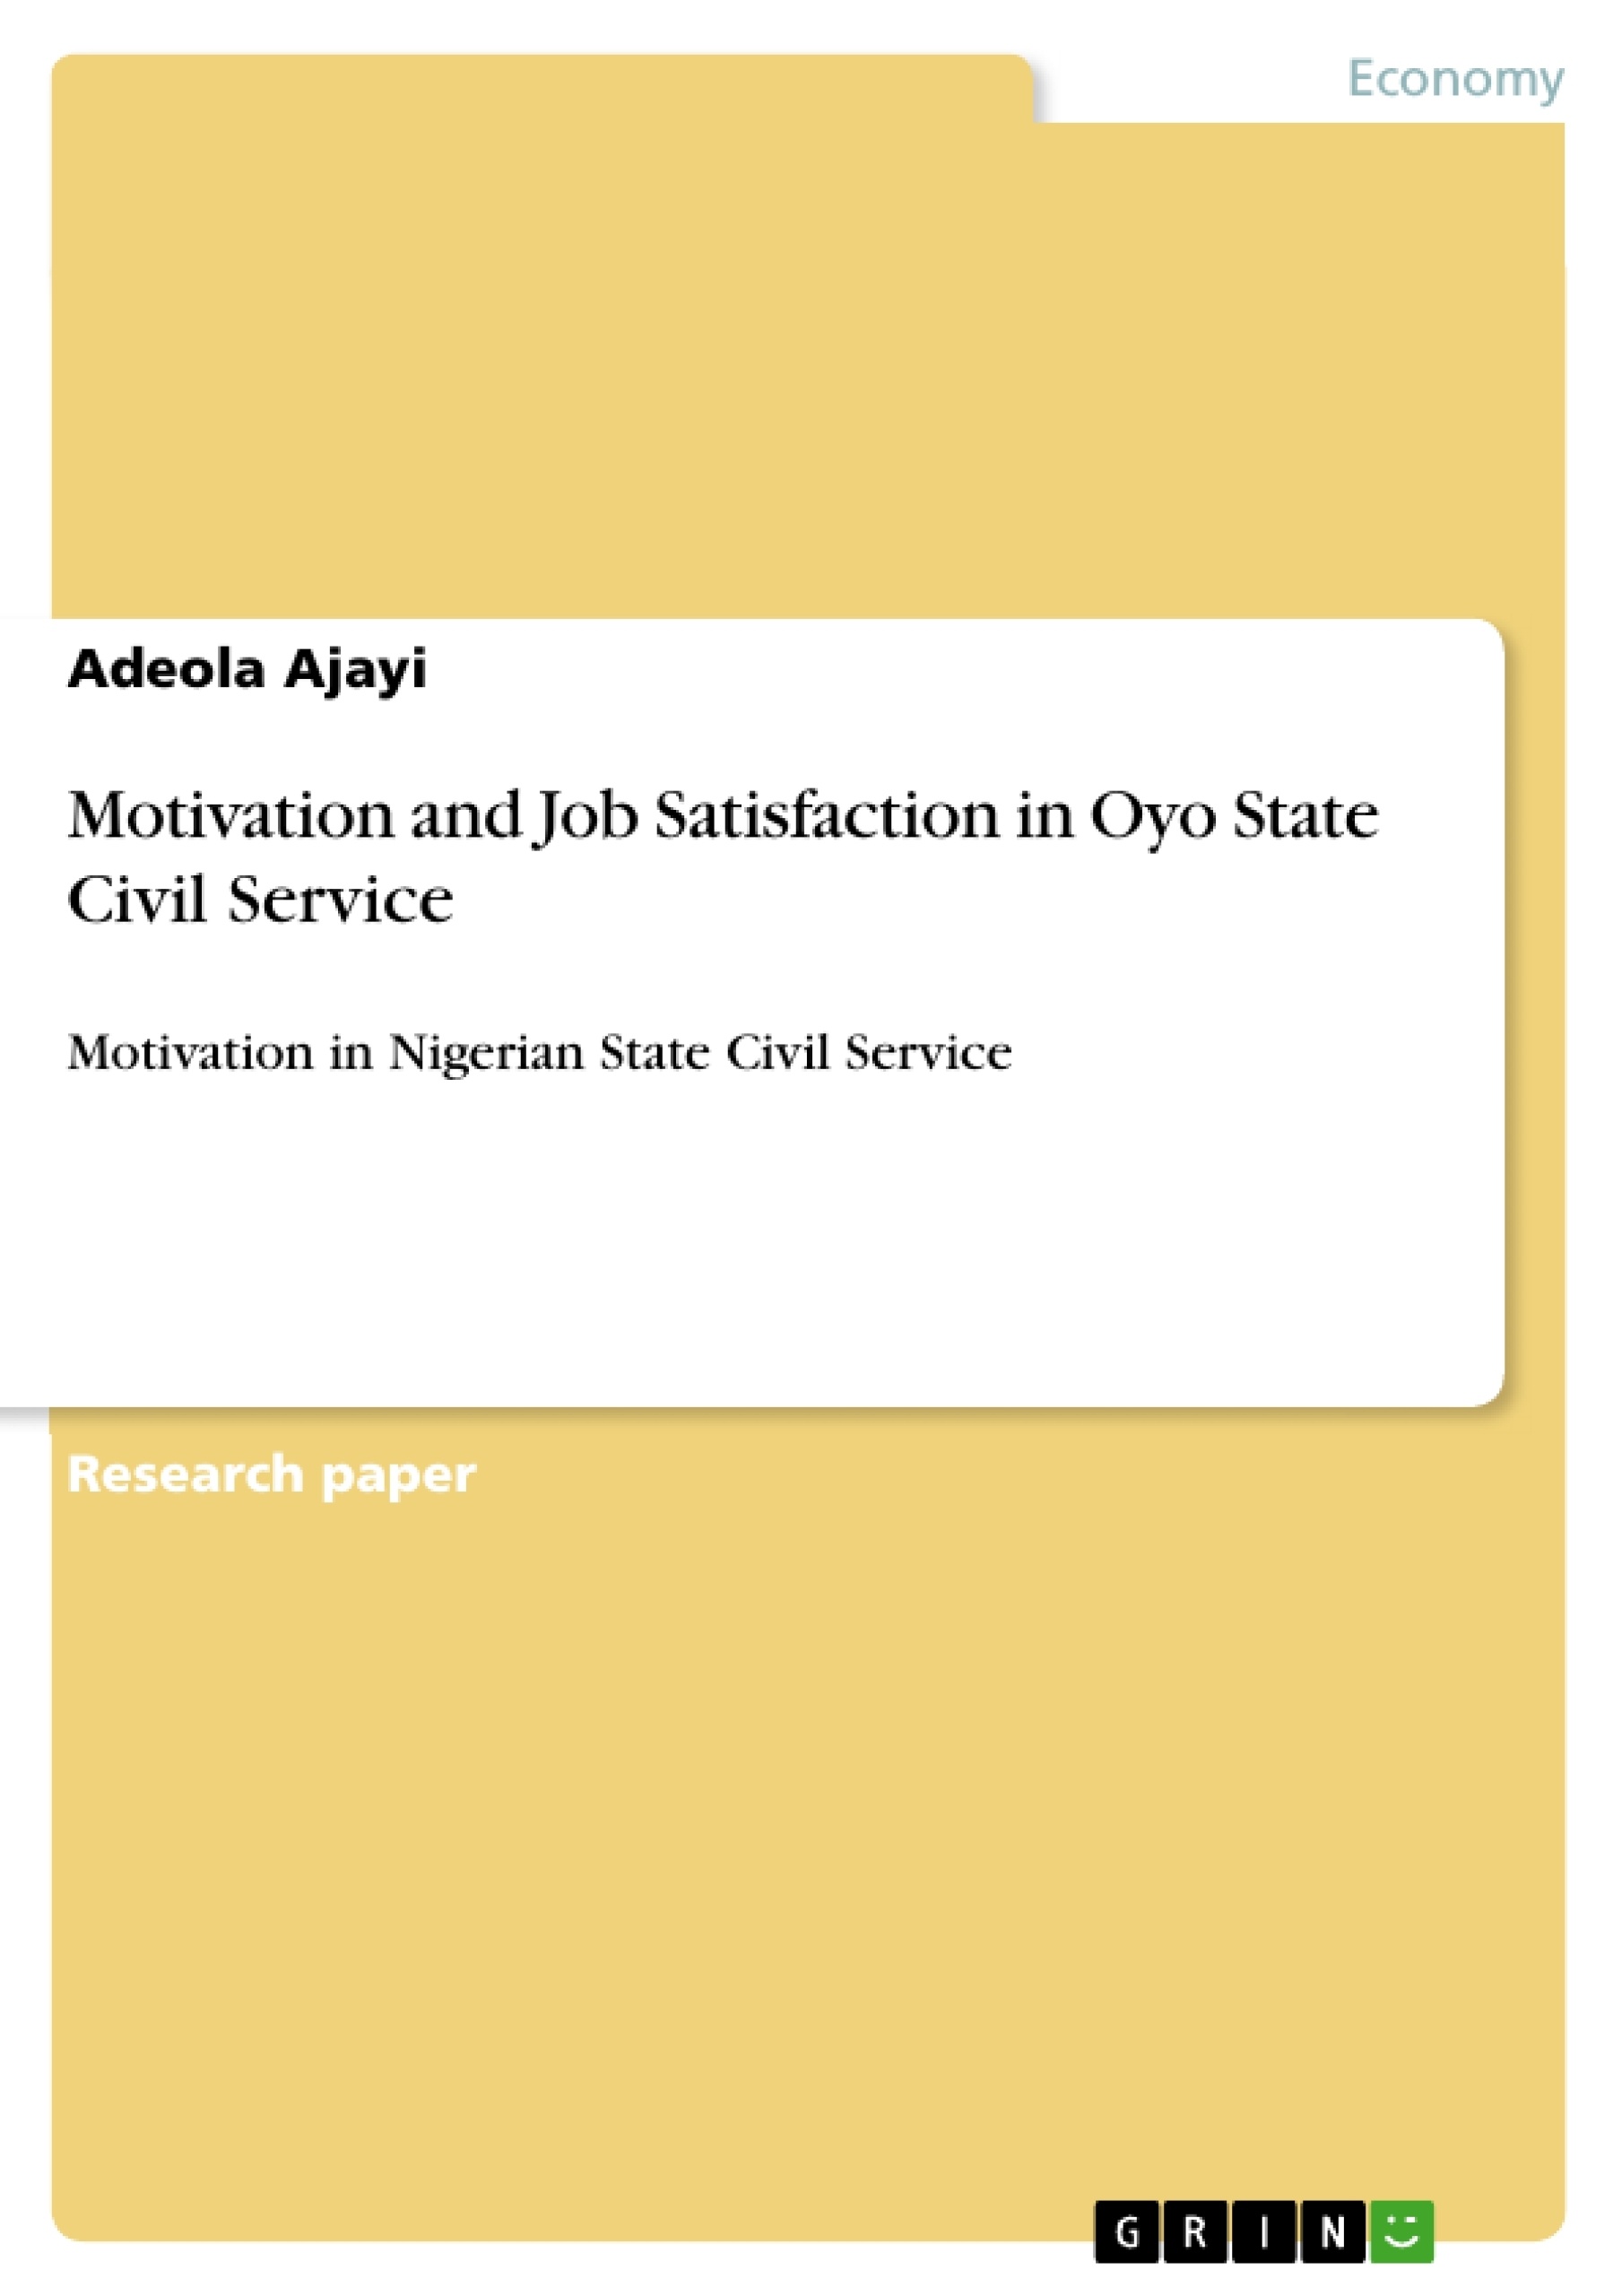 Title: Motivation and Job Satisfaction in Oyo State Civil Service